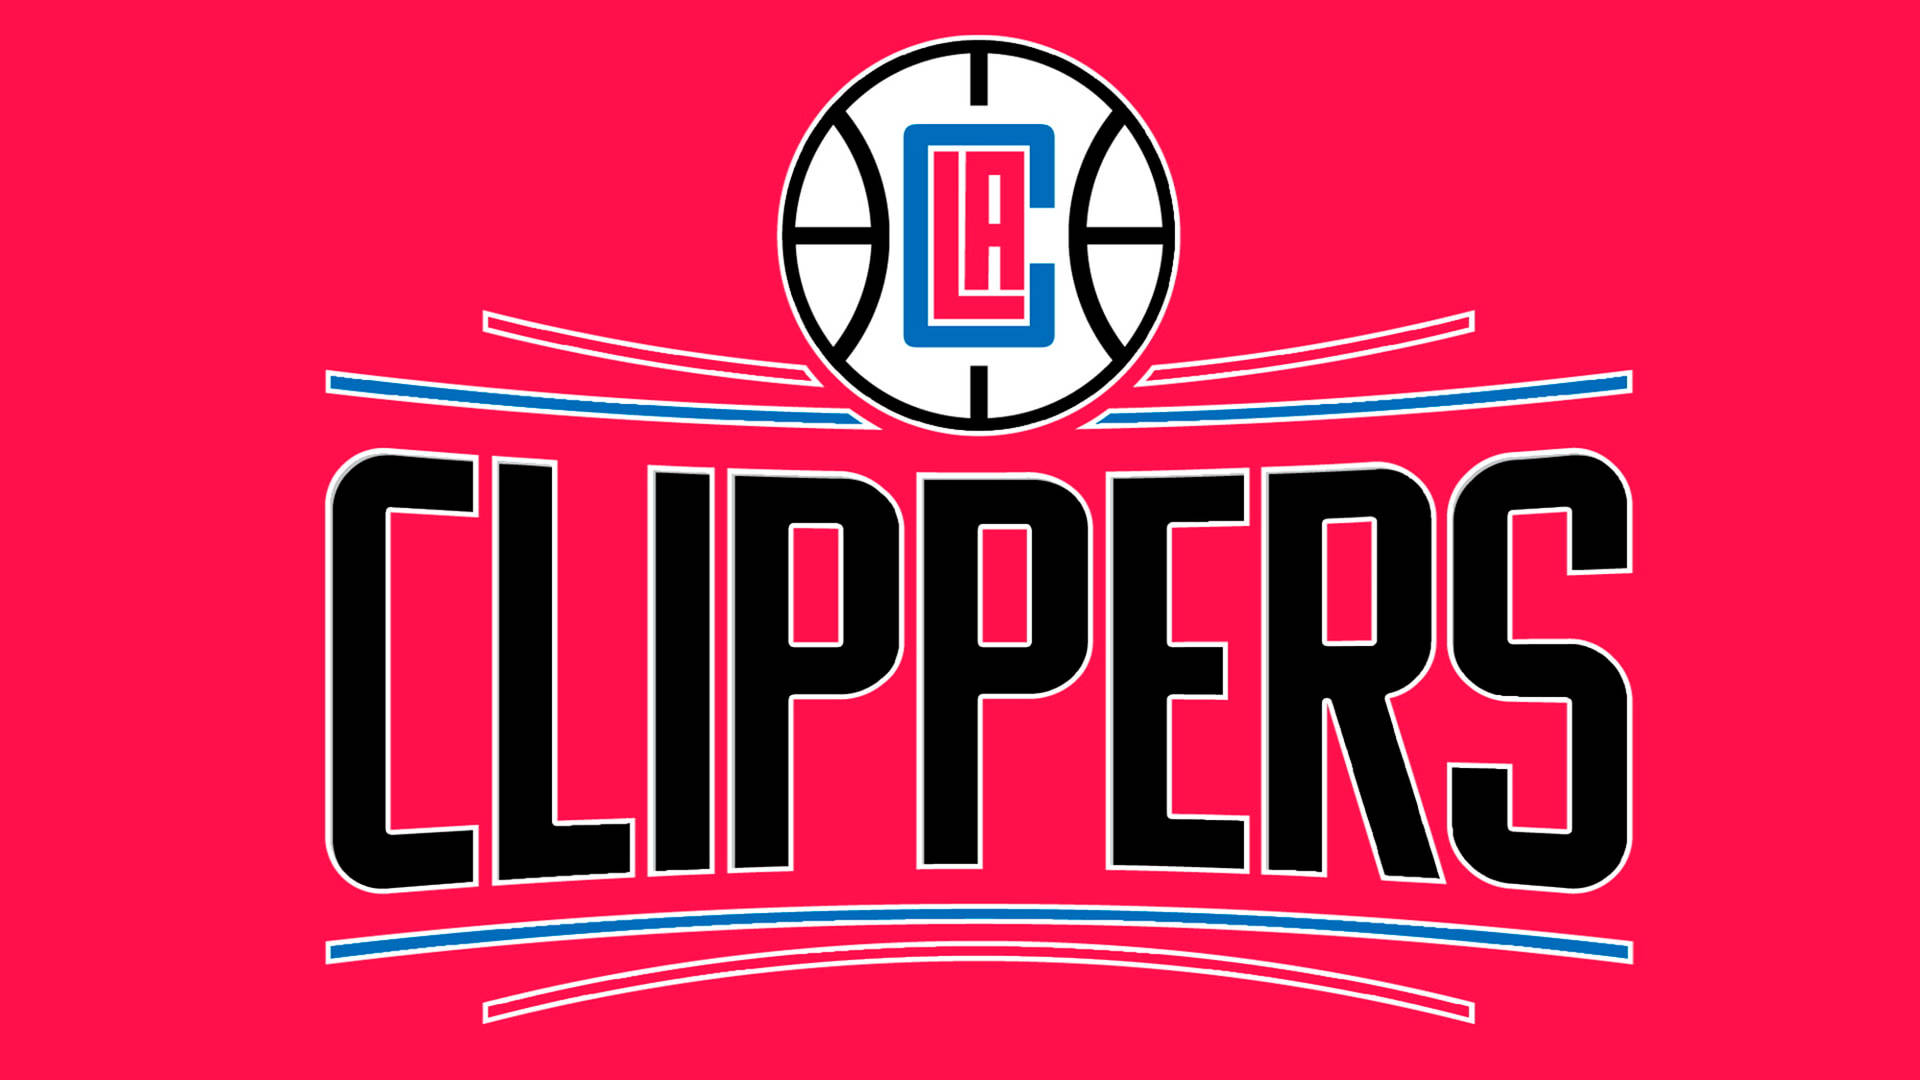 Los Angeles Clippers Neon Pink Background Wallpaper